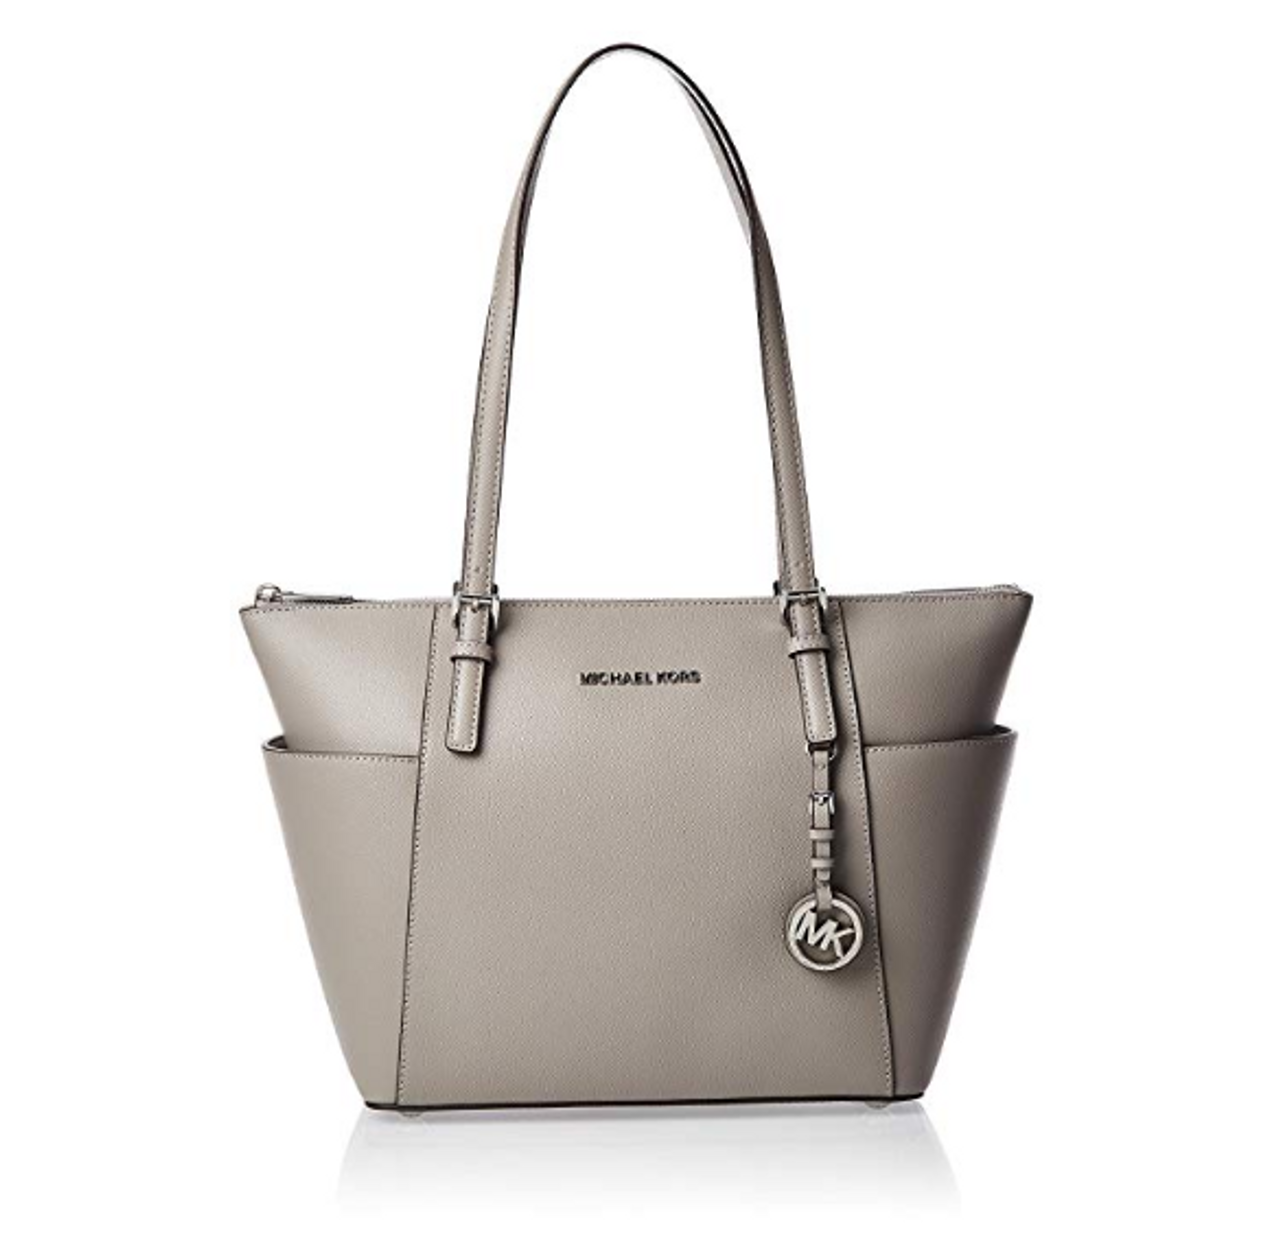 Jet Set East/West Top Zip Tote Pearl Grey for sale or rent at Bargain  Center serving Southeatern Kansas, Northeastern Oklahoma, and Northwest  Arkansas.